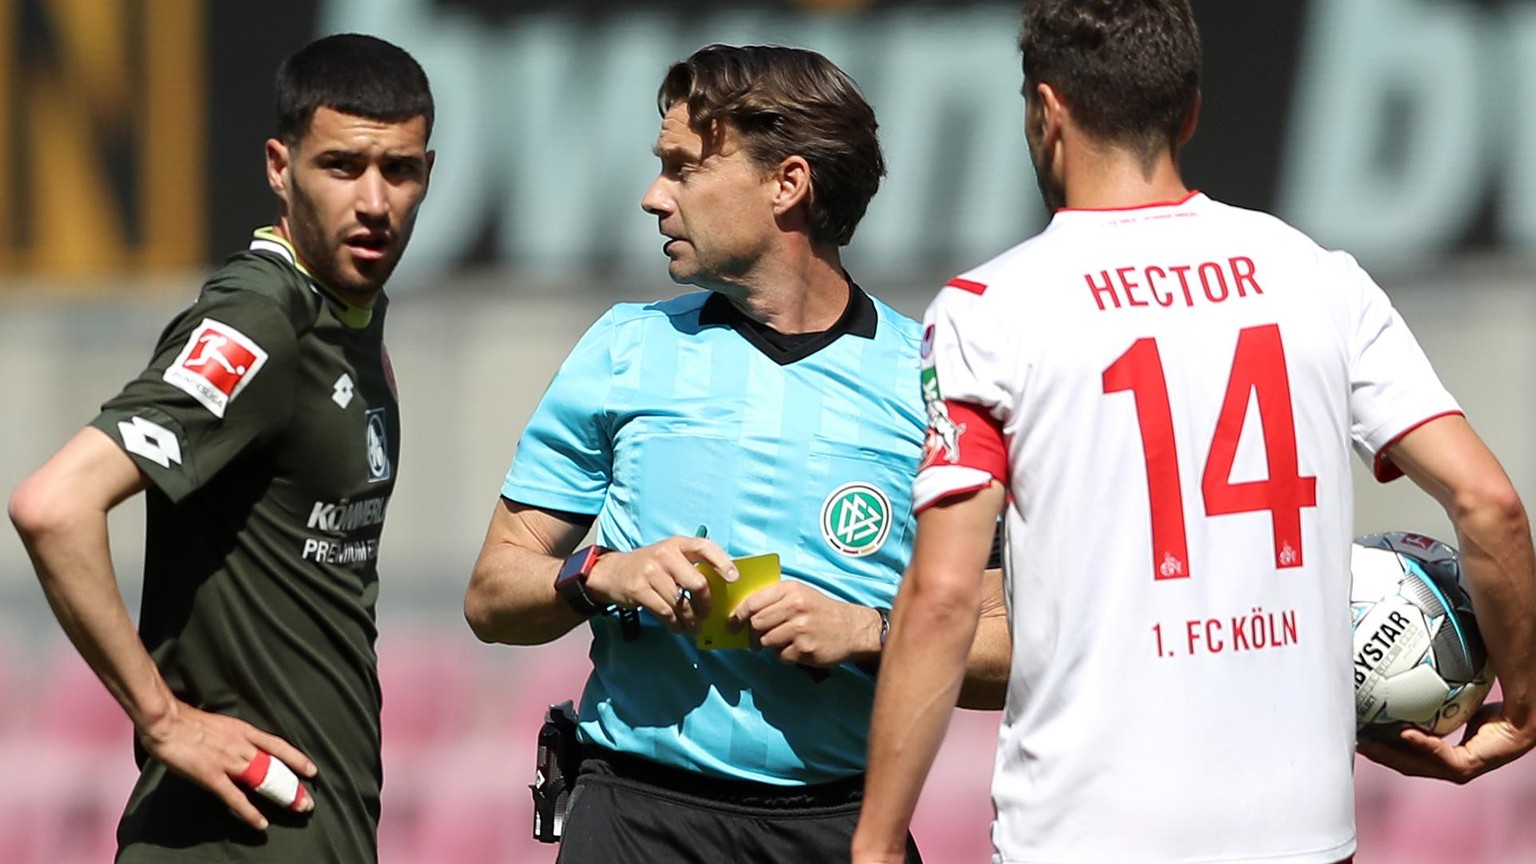 epa08427903 Referee Guido Winkmann discusses with Jonas Hector (R) of 1. FC Koeln during the German Bundesliga soccer match between 1. FC Koeln and 1. FSV Mainz 05 at RheinEnergieStadion in Cologne, G ...